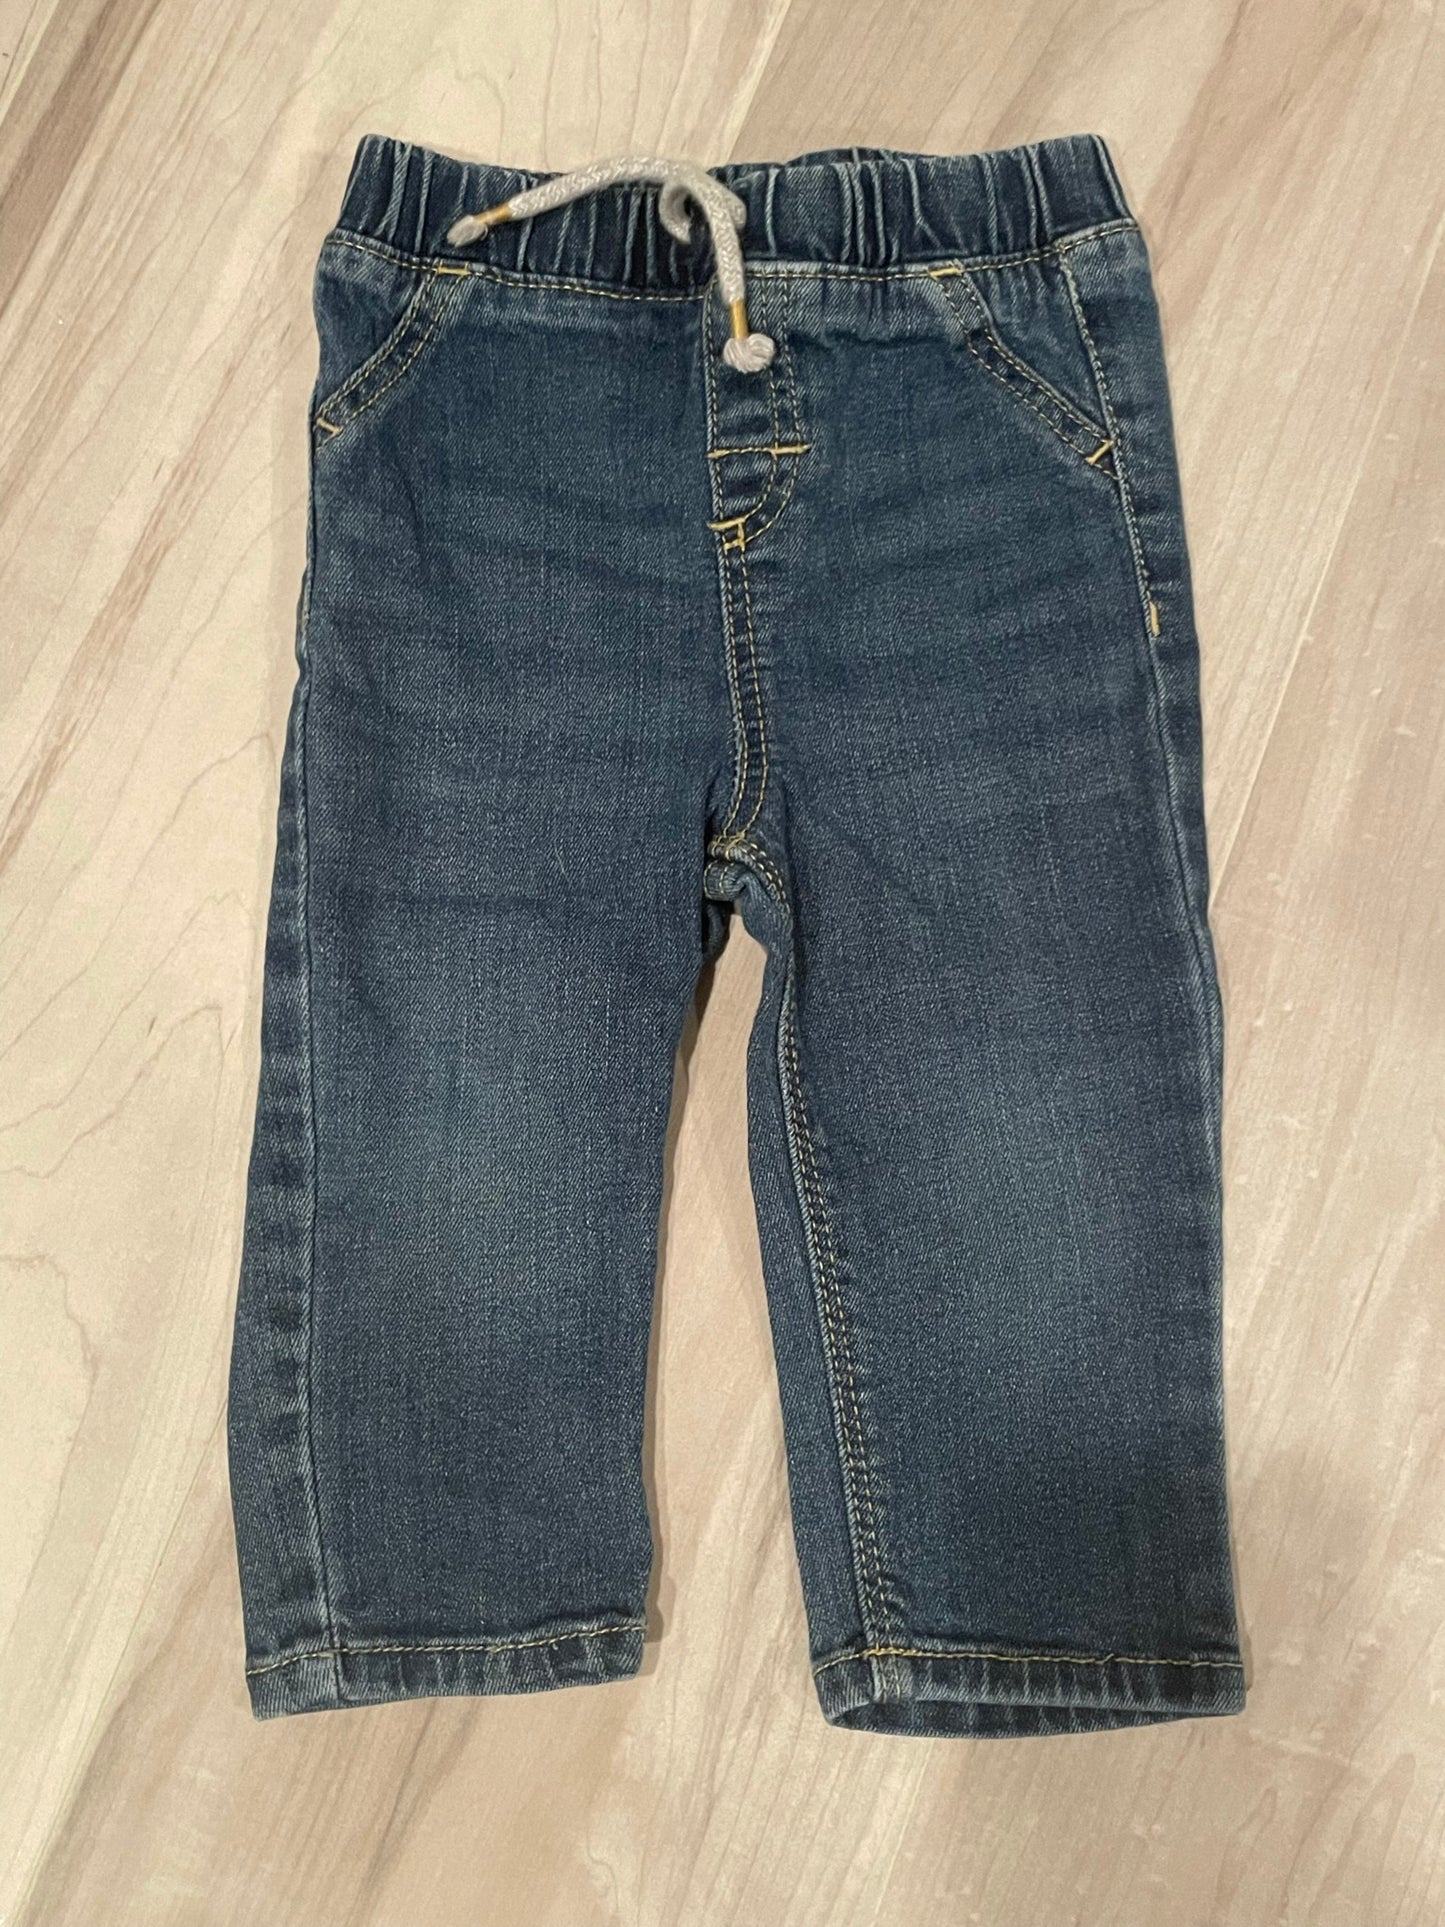 Jumping Beans Jeans - 18 Months